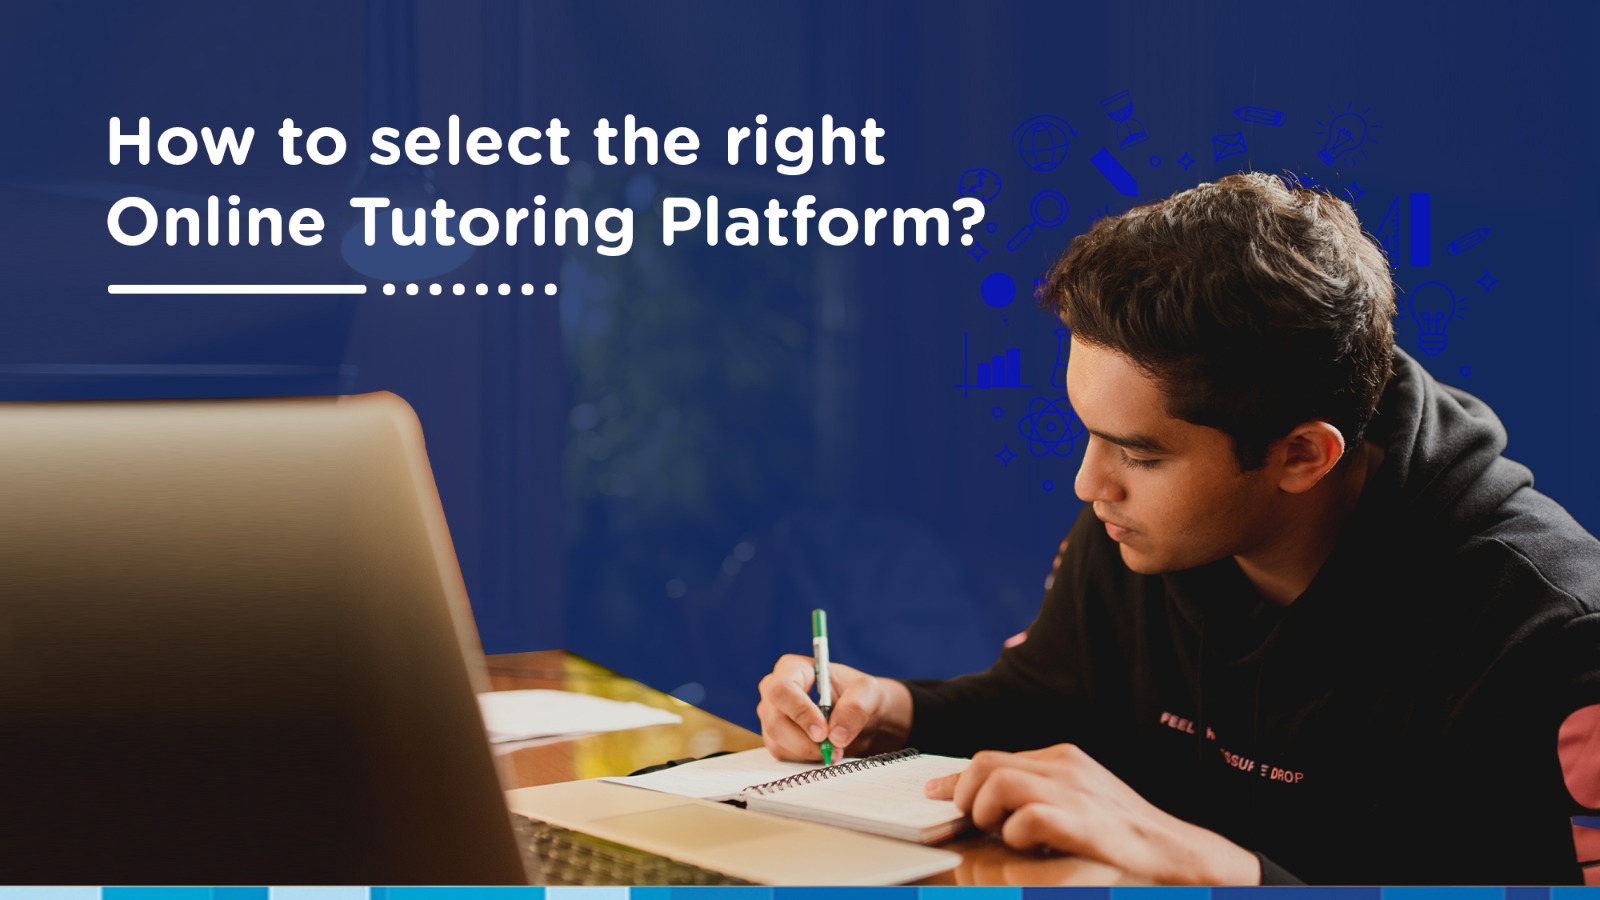 If you are looking for tuition classes for your child, let’s see in what ways online platforms benefit students: